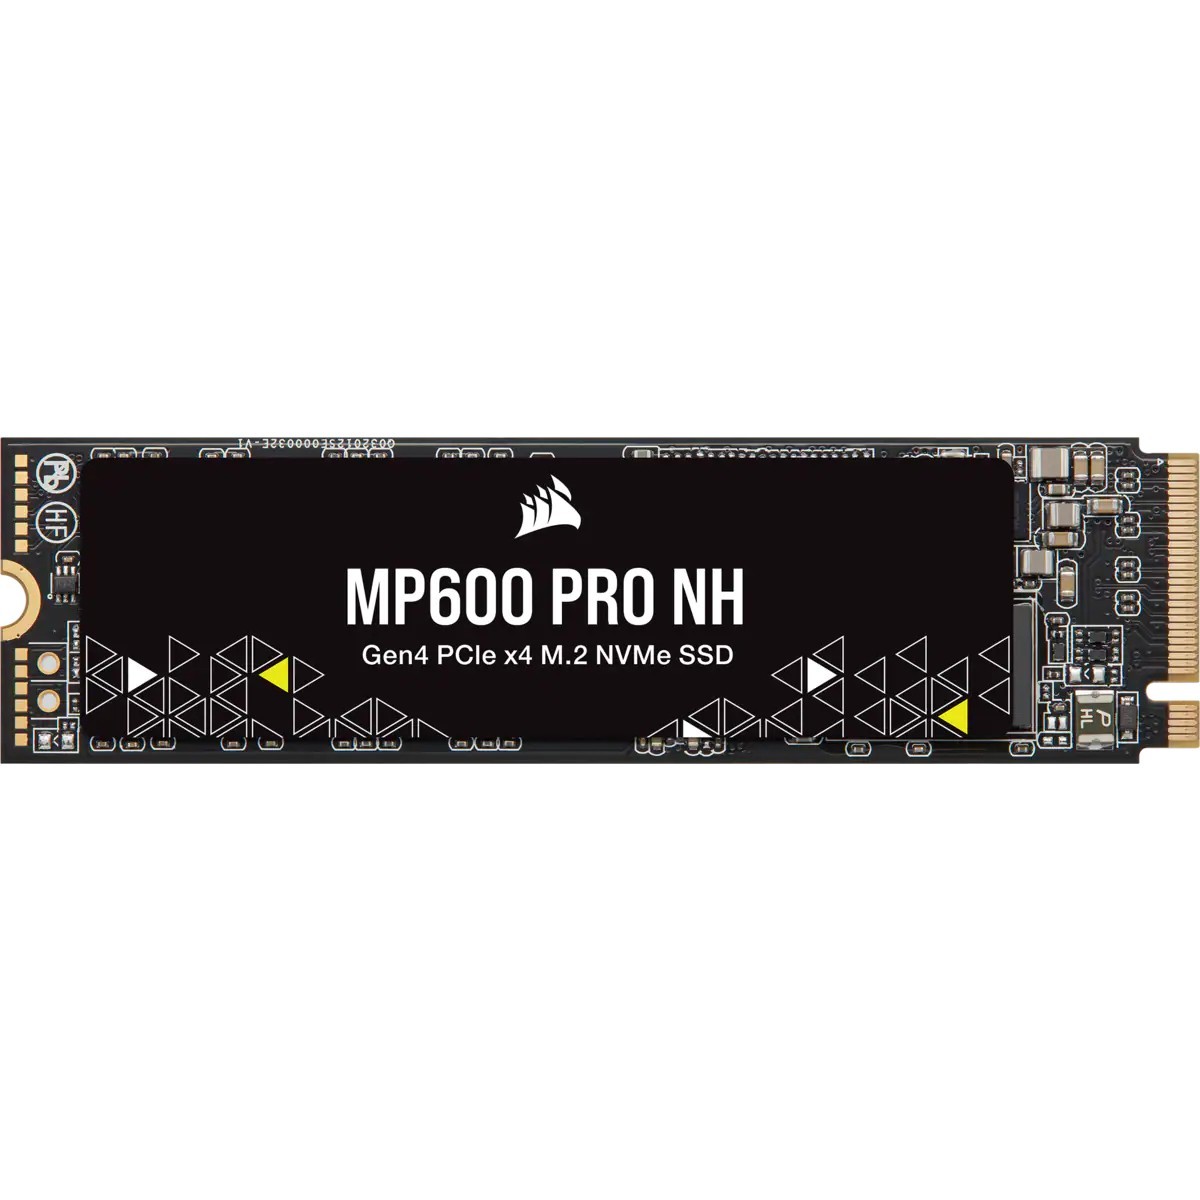 Corsair CSSD-F4000GBMP600PNH NVMe 4,000 GB - Solid State Disk